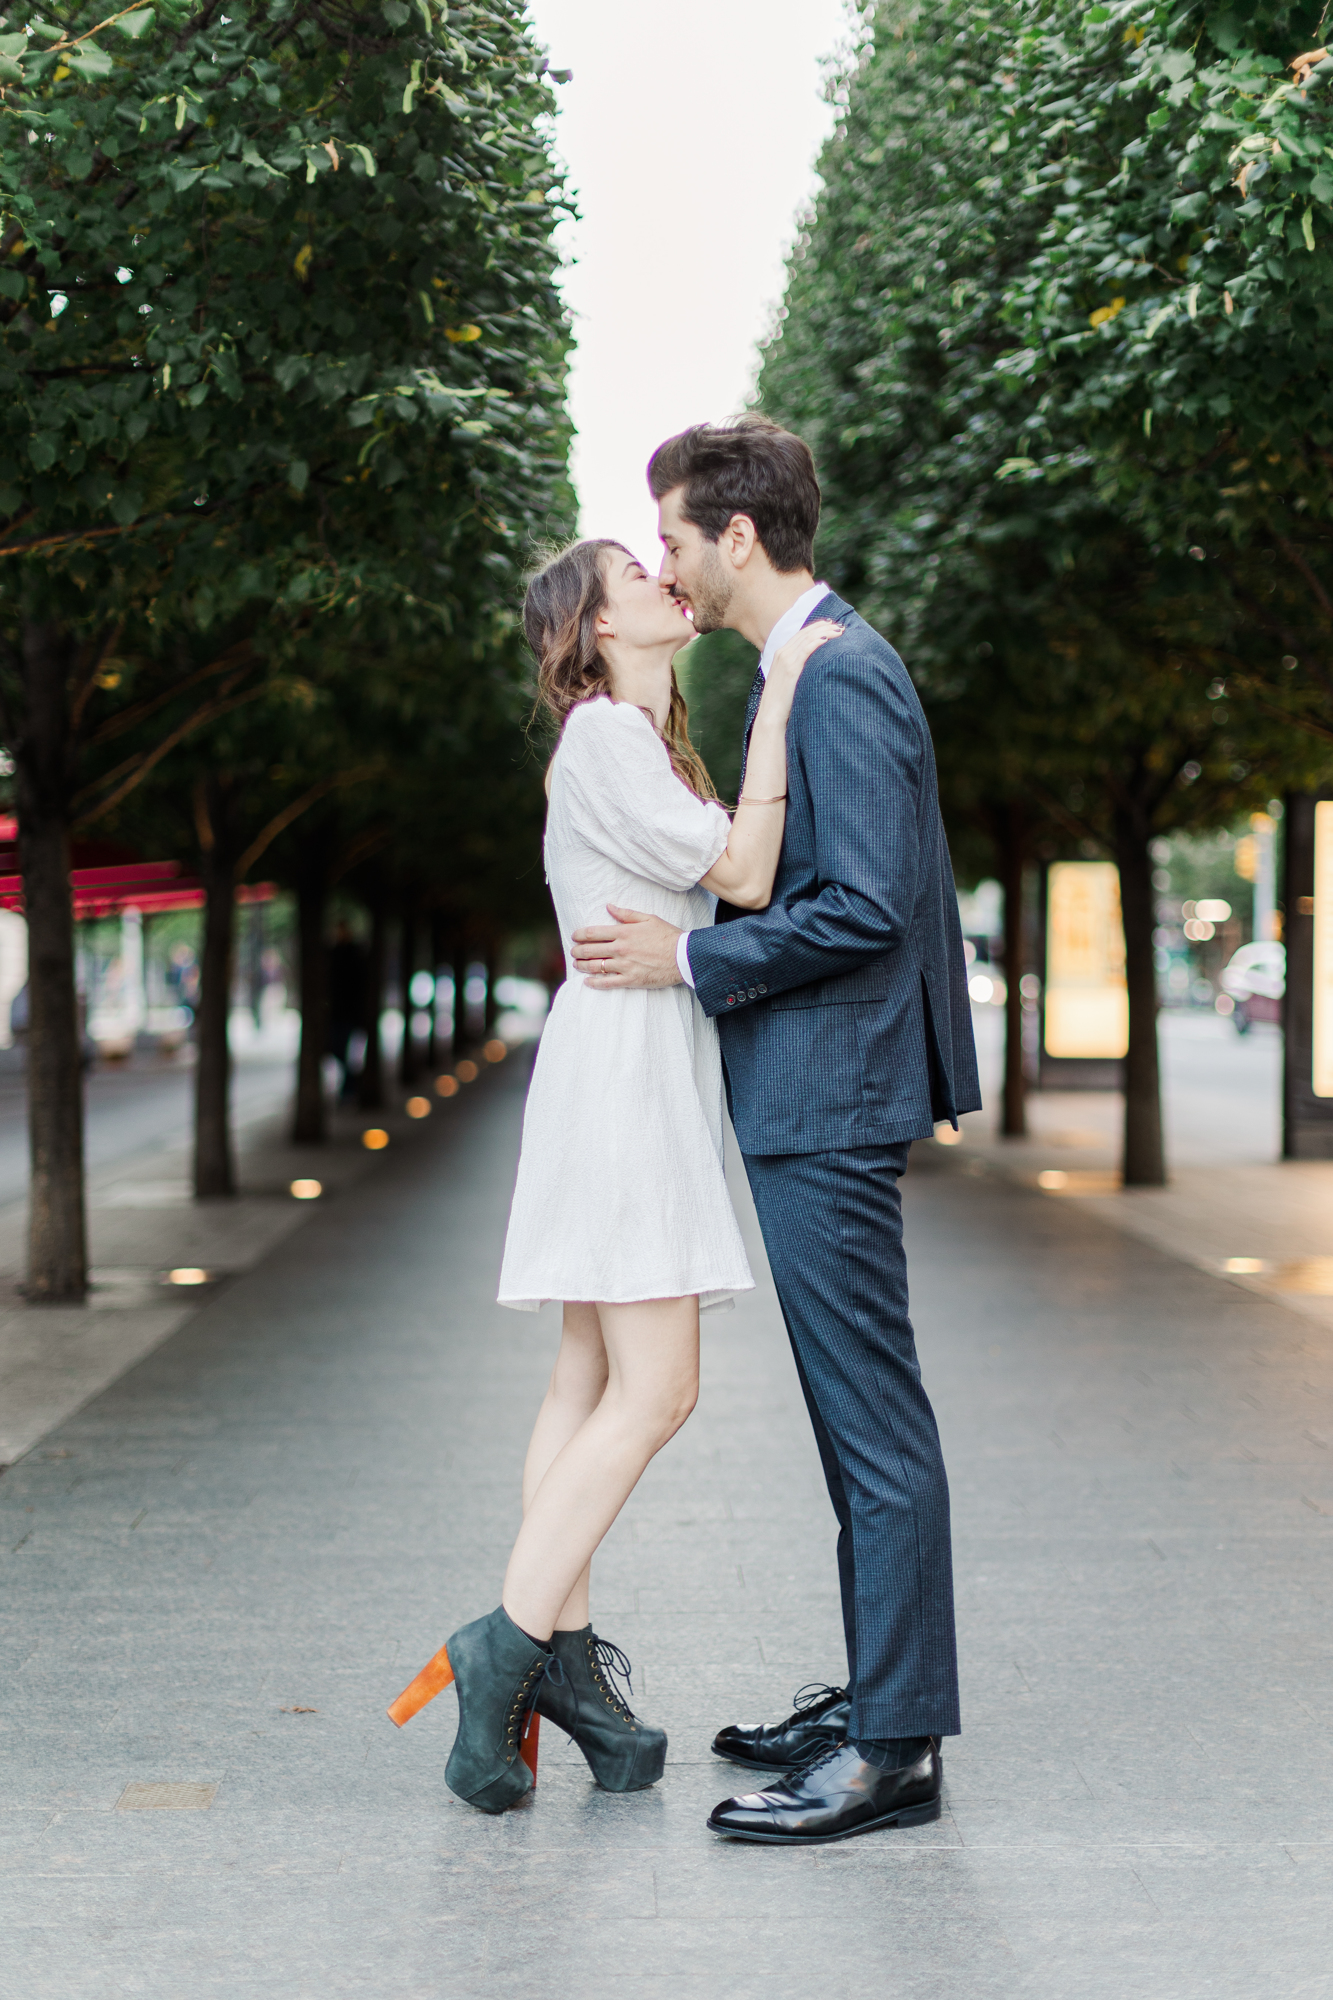 Bright Central Park Engagement Photos in NYC